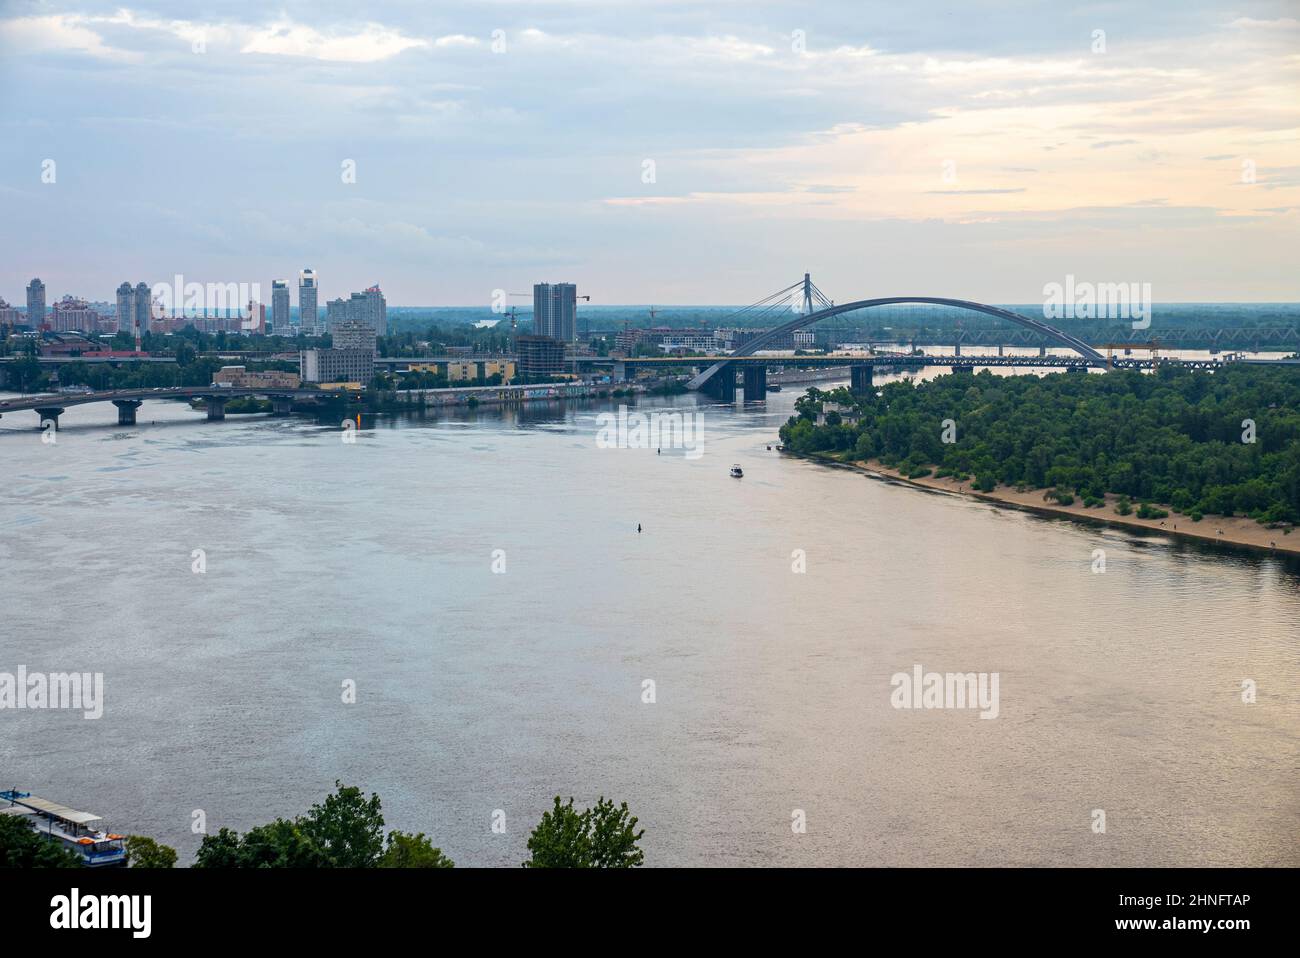 City landscape with bridges over dnipro river against cloudy sky Stock Photo